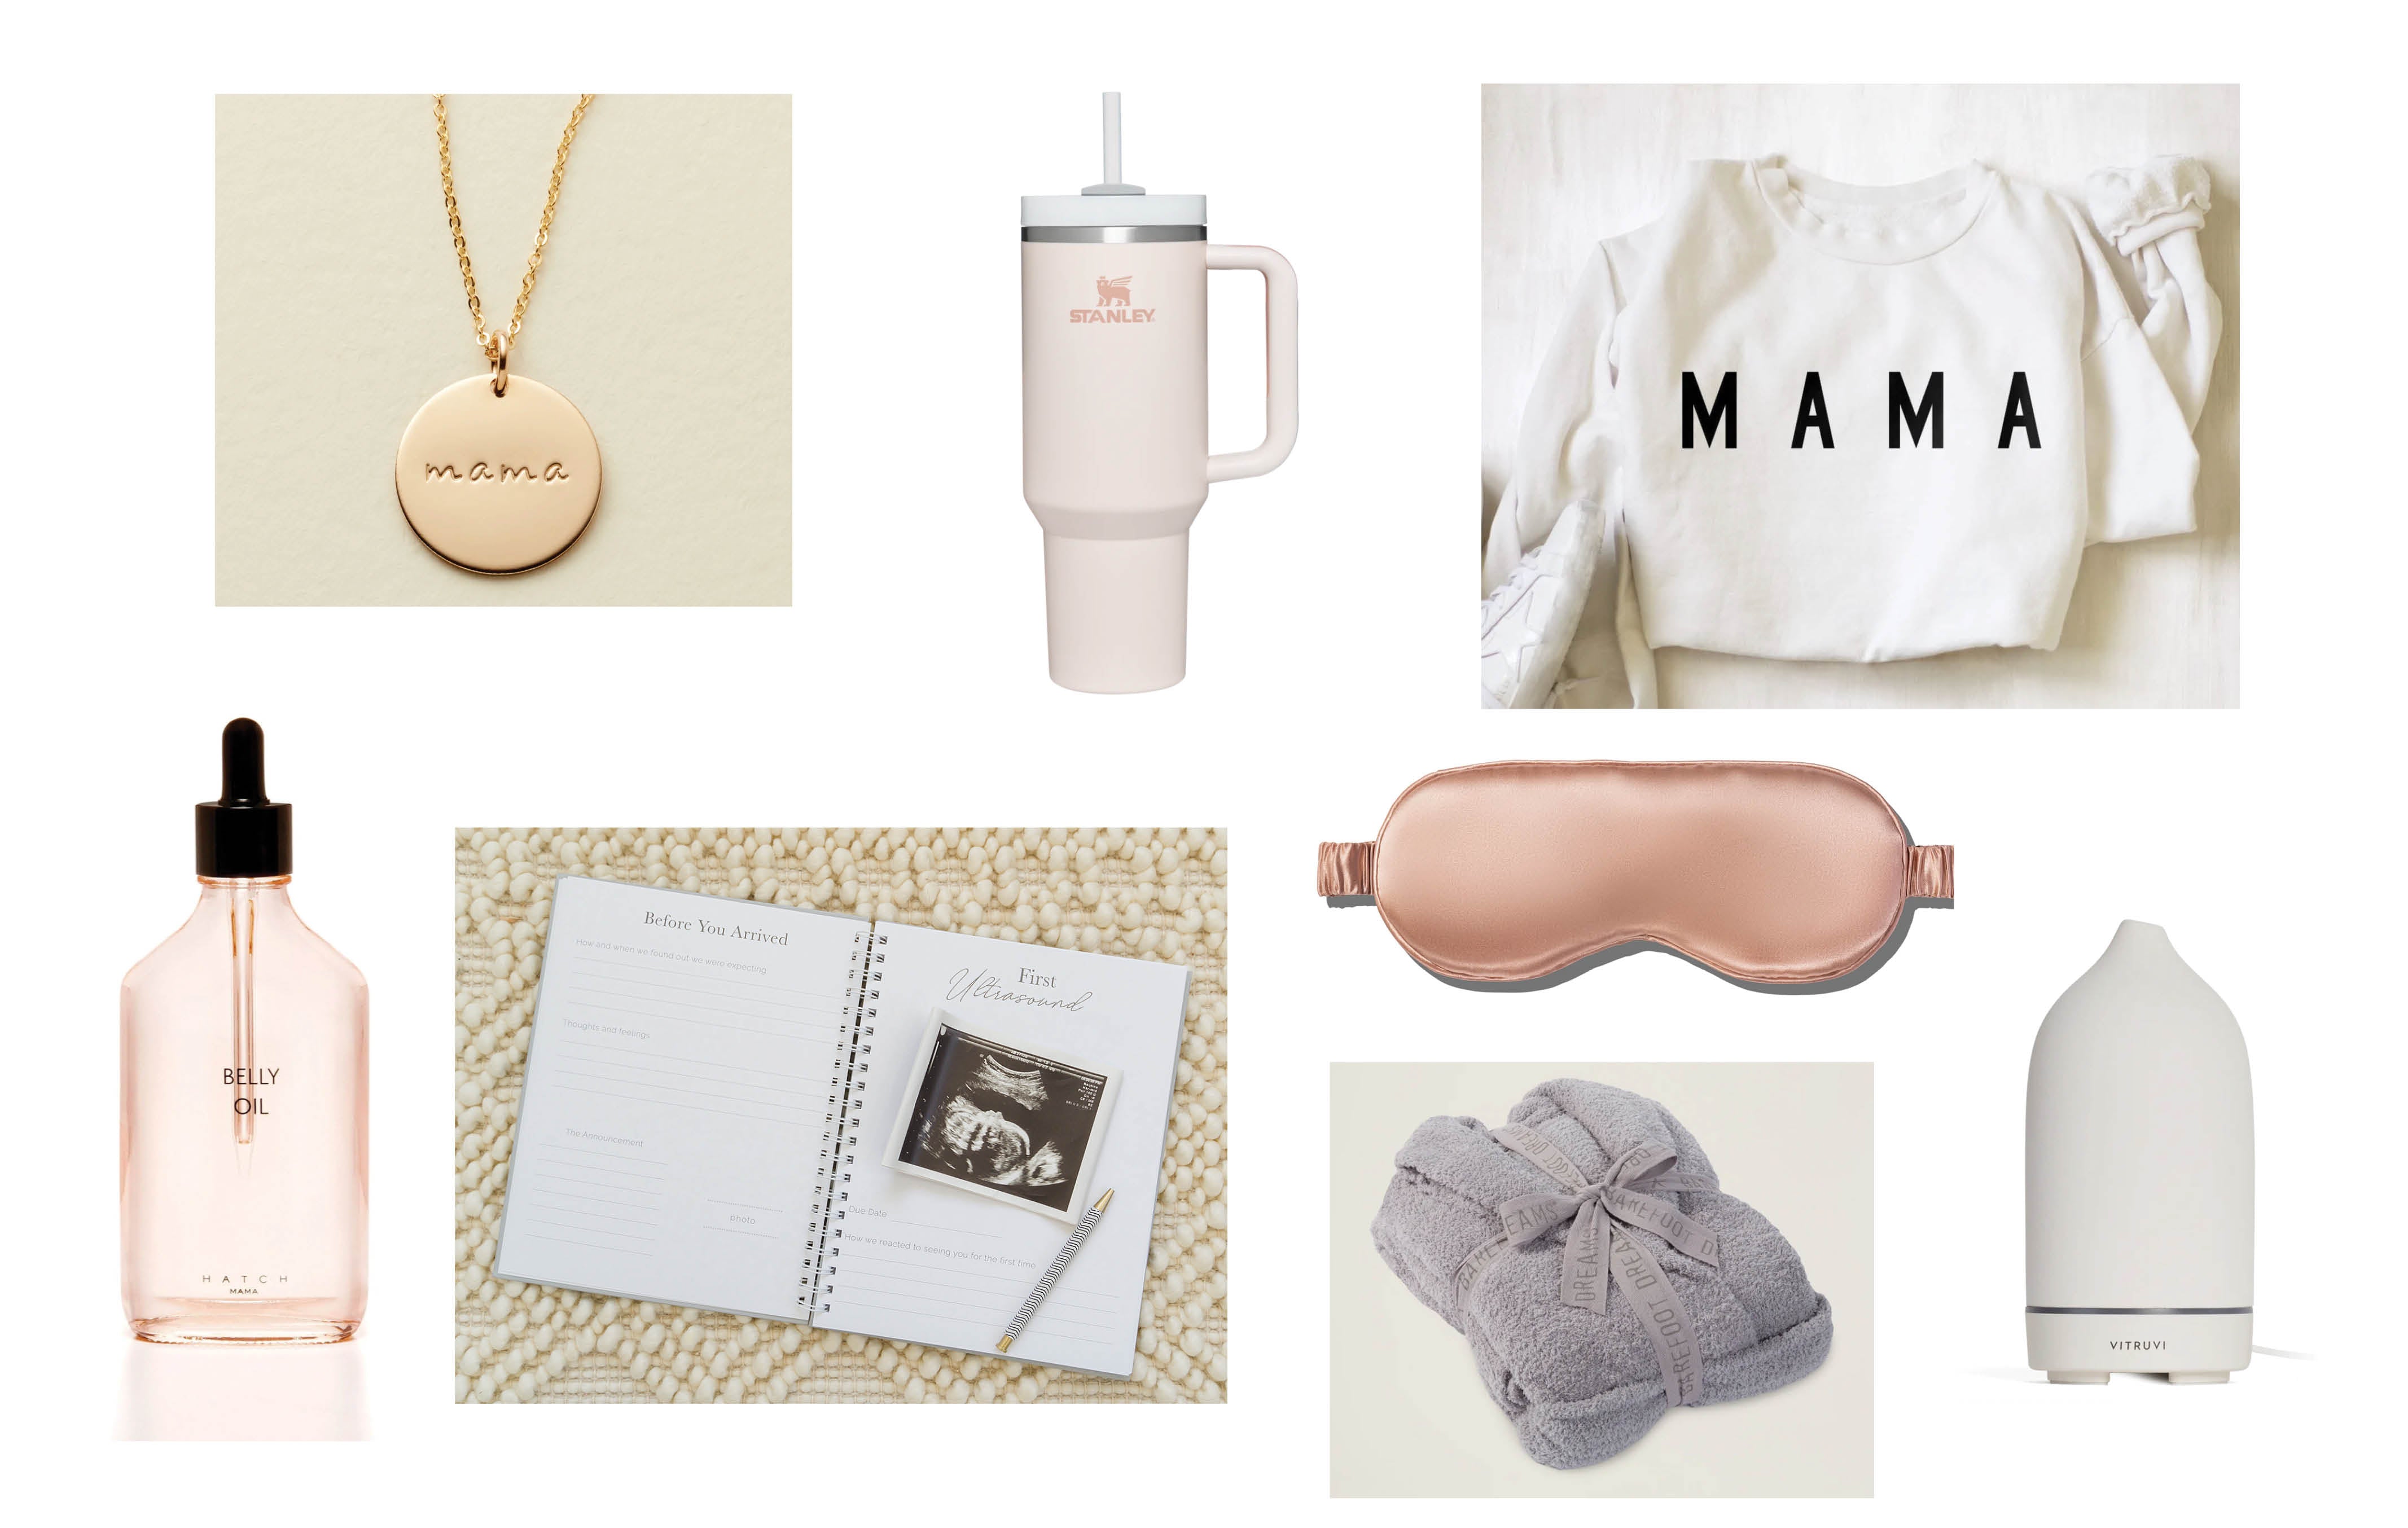 15 Gifts for Stay at Home Moms (ways to show her you care)